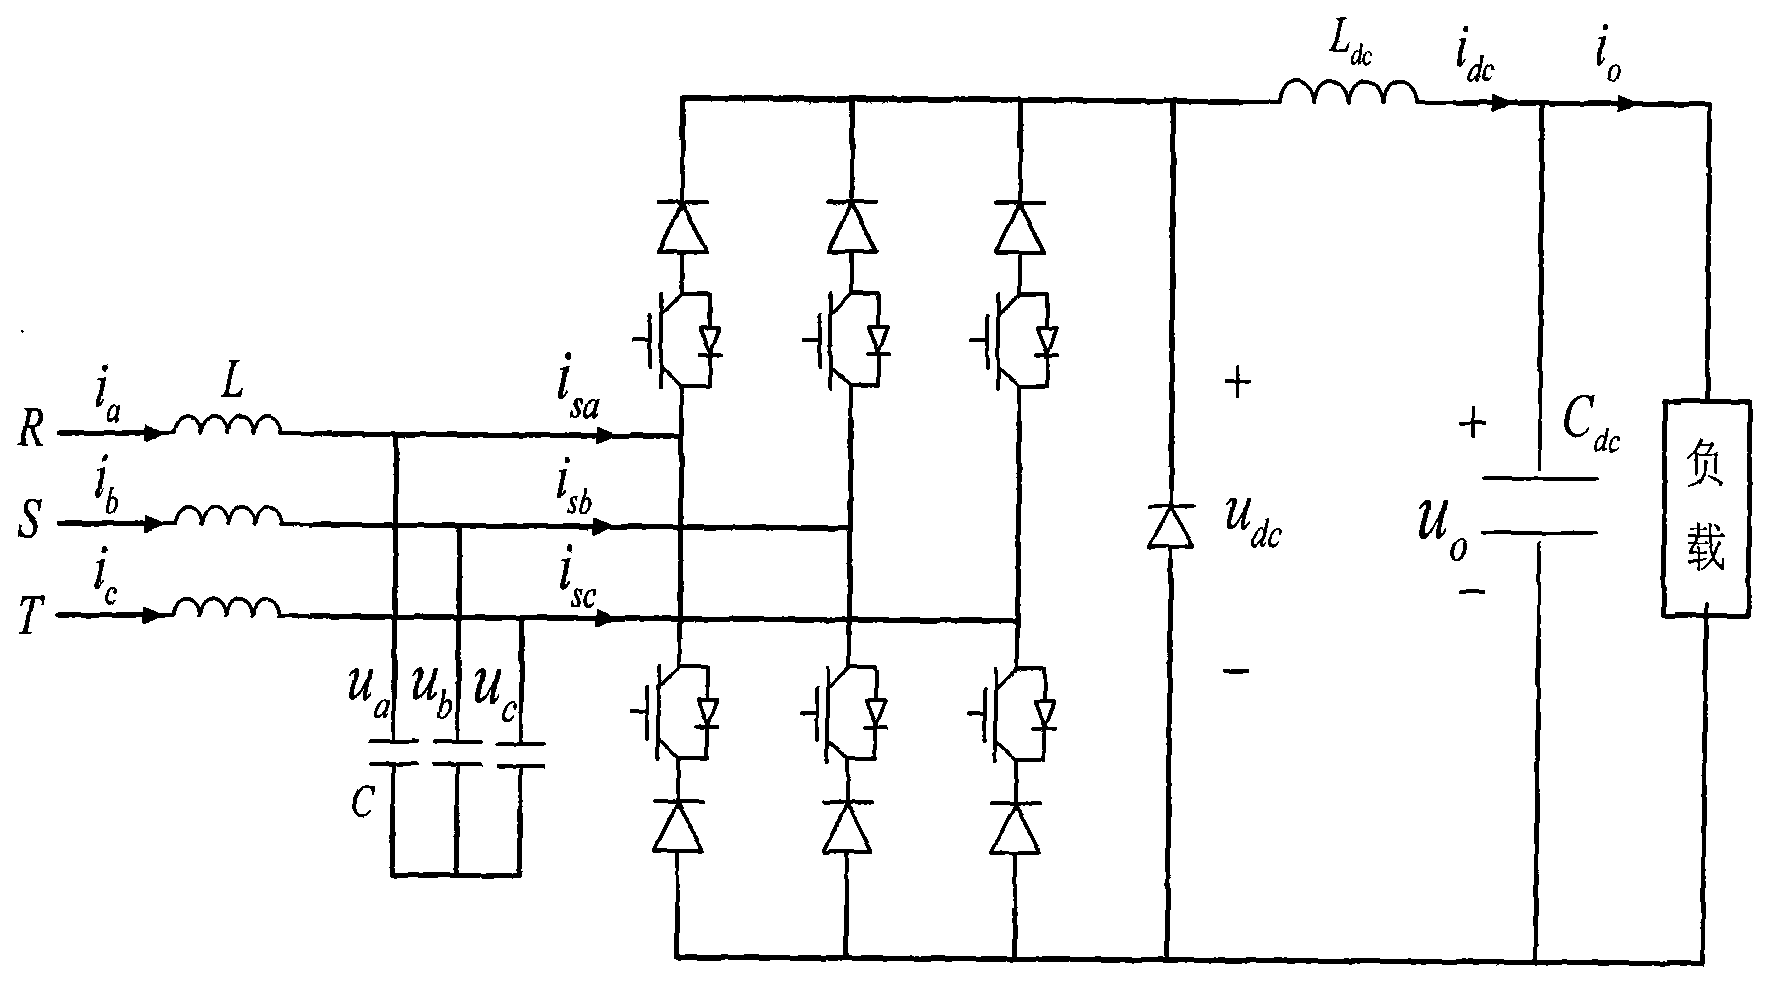 Current source type rectifier and grid-connected control method based on virtual resistor